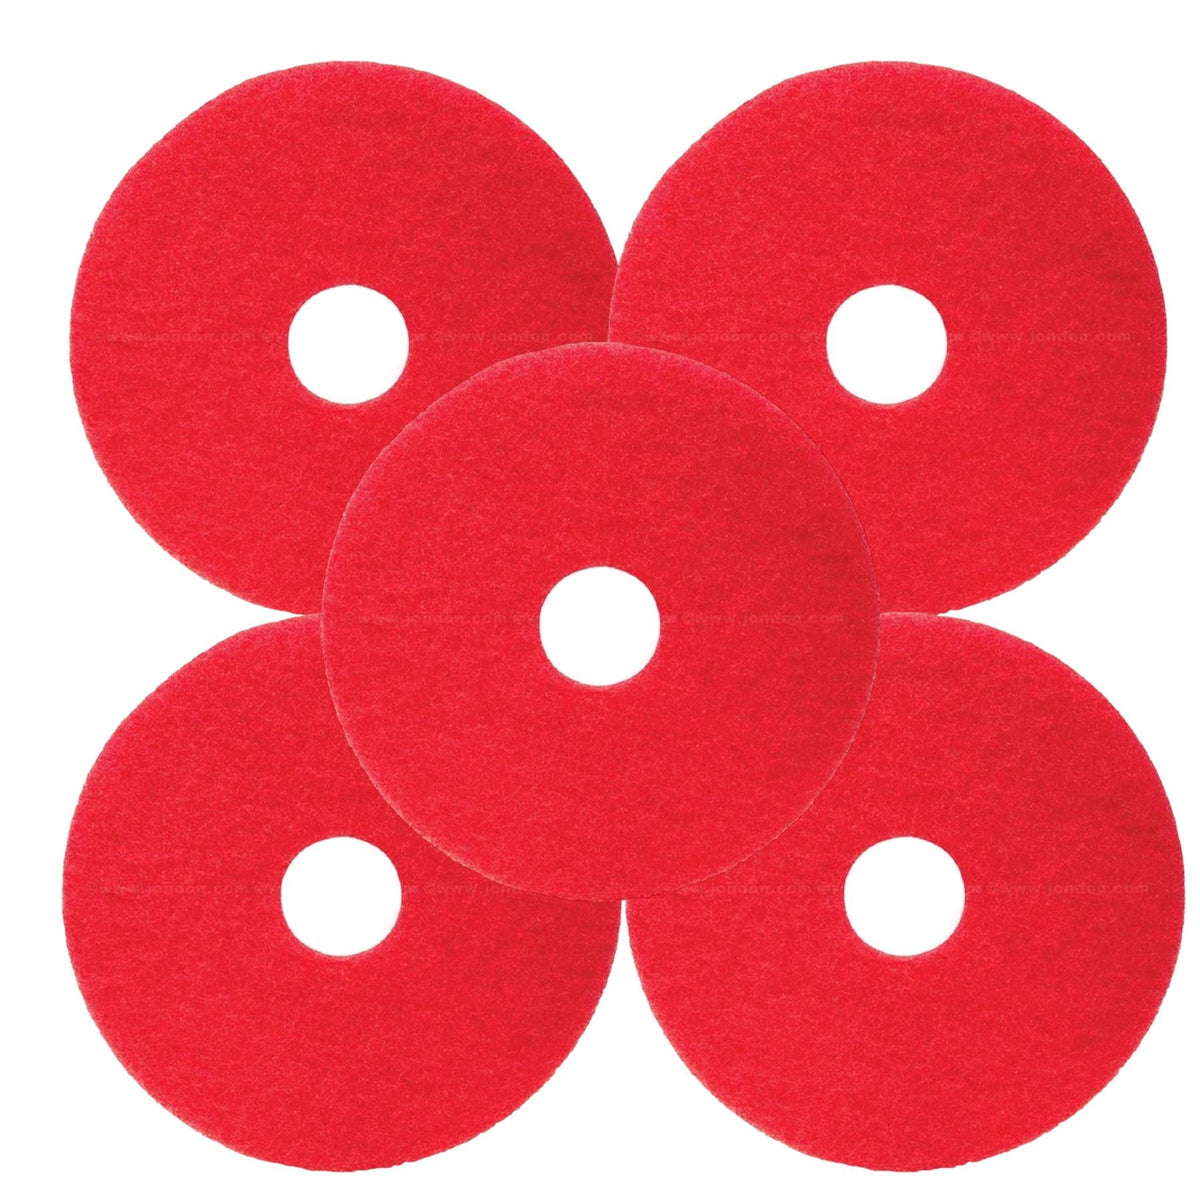 Red Floor Pads Pack of 5 14 inch Pads For Machine Buffing